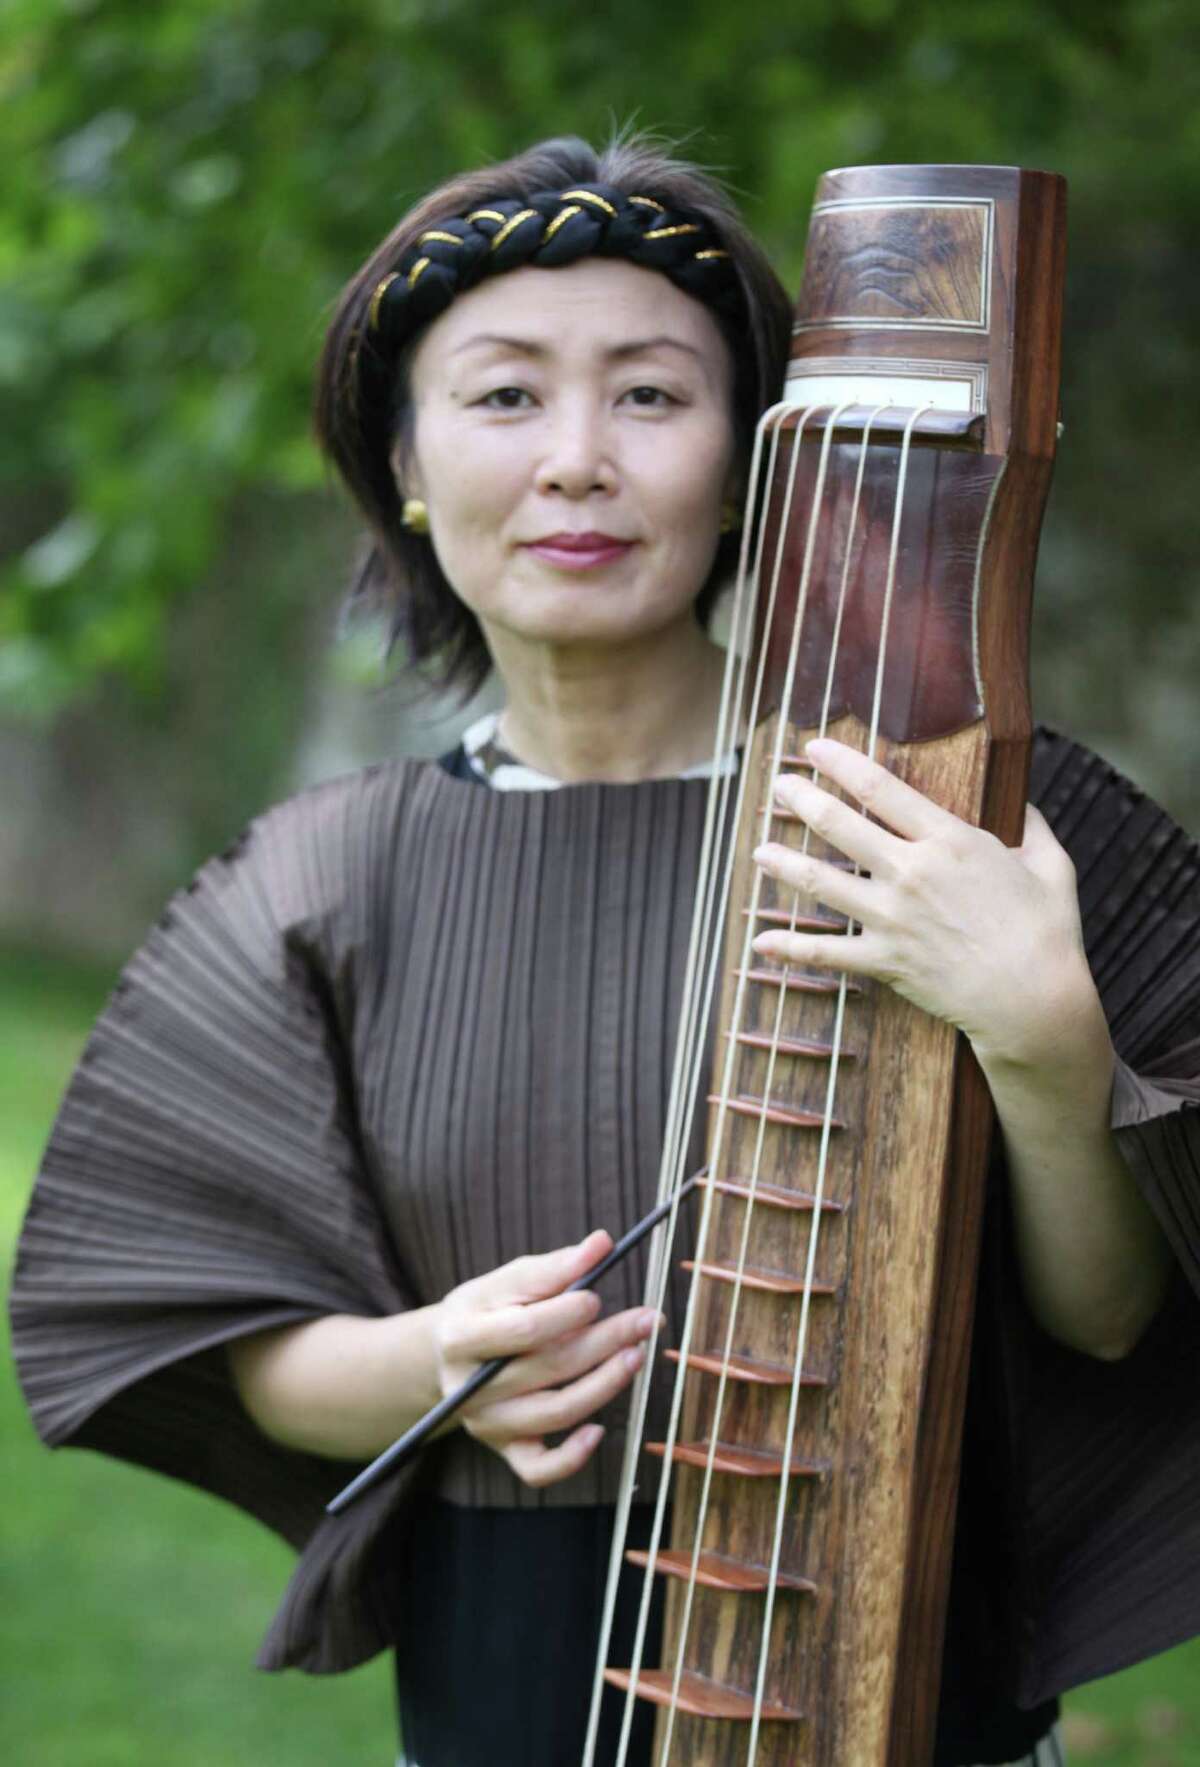 A world premiere of a choral work by composer Jin Hi Kim, pictured with her Korean komungo instrument, takes place Sunday, April 6, with the Mendelssohn Choir of Connecticut at Fairfield University. Her "Child of War" piece explores one of the most horrific, but iconic, photographs from the Vietnam War.